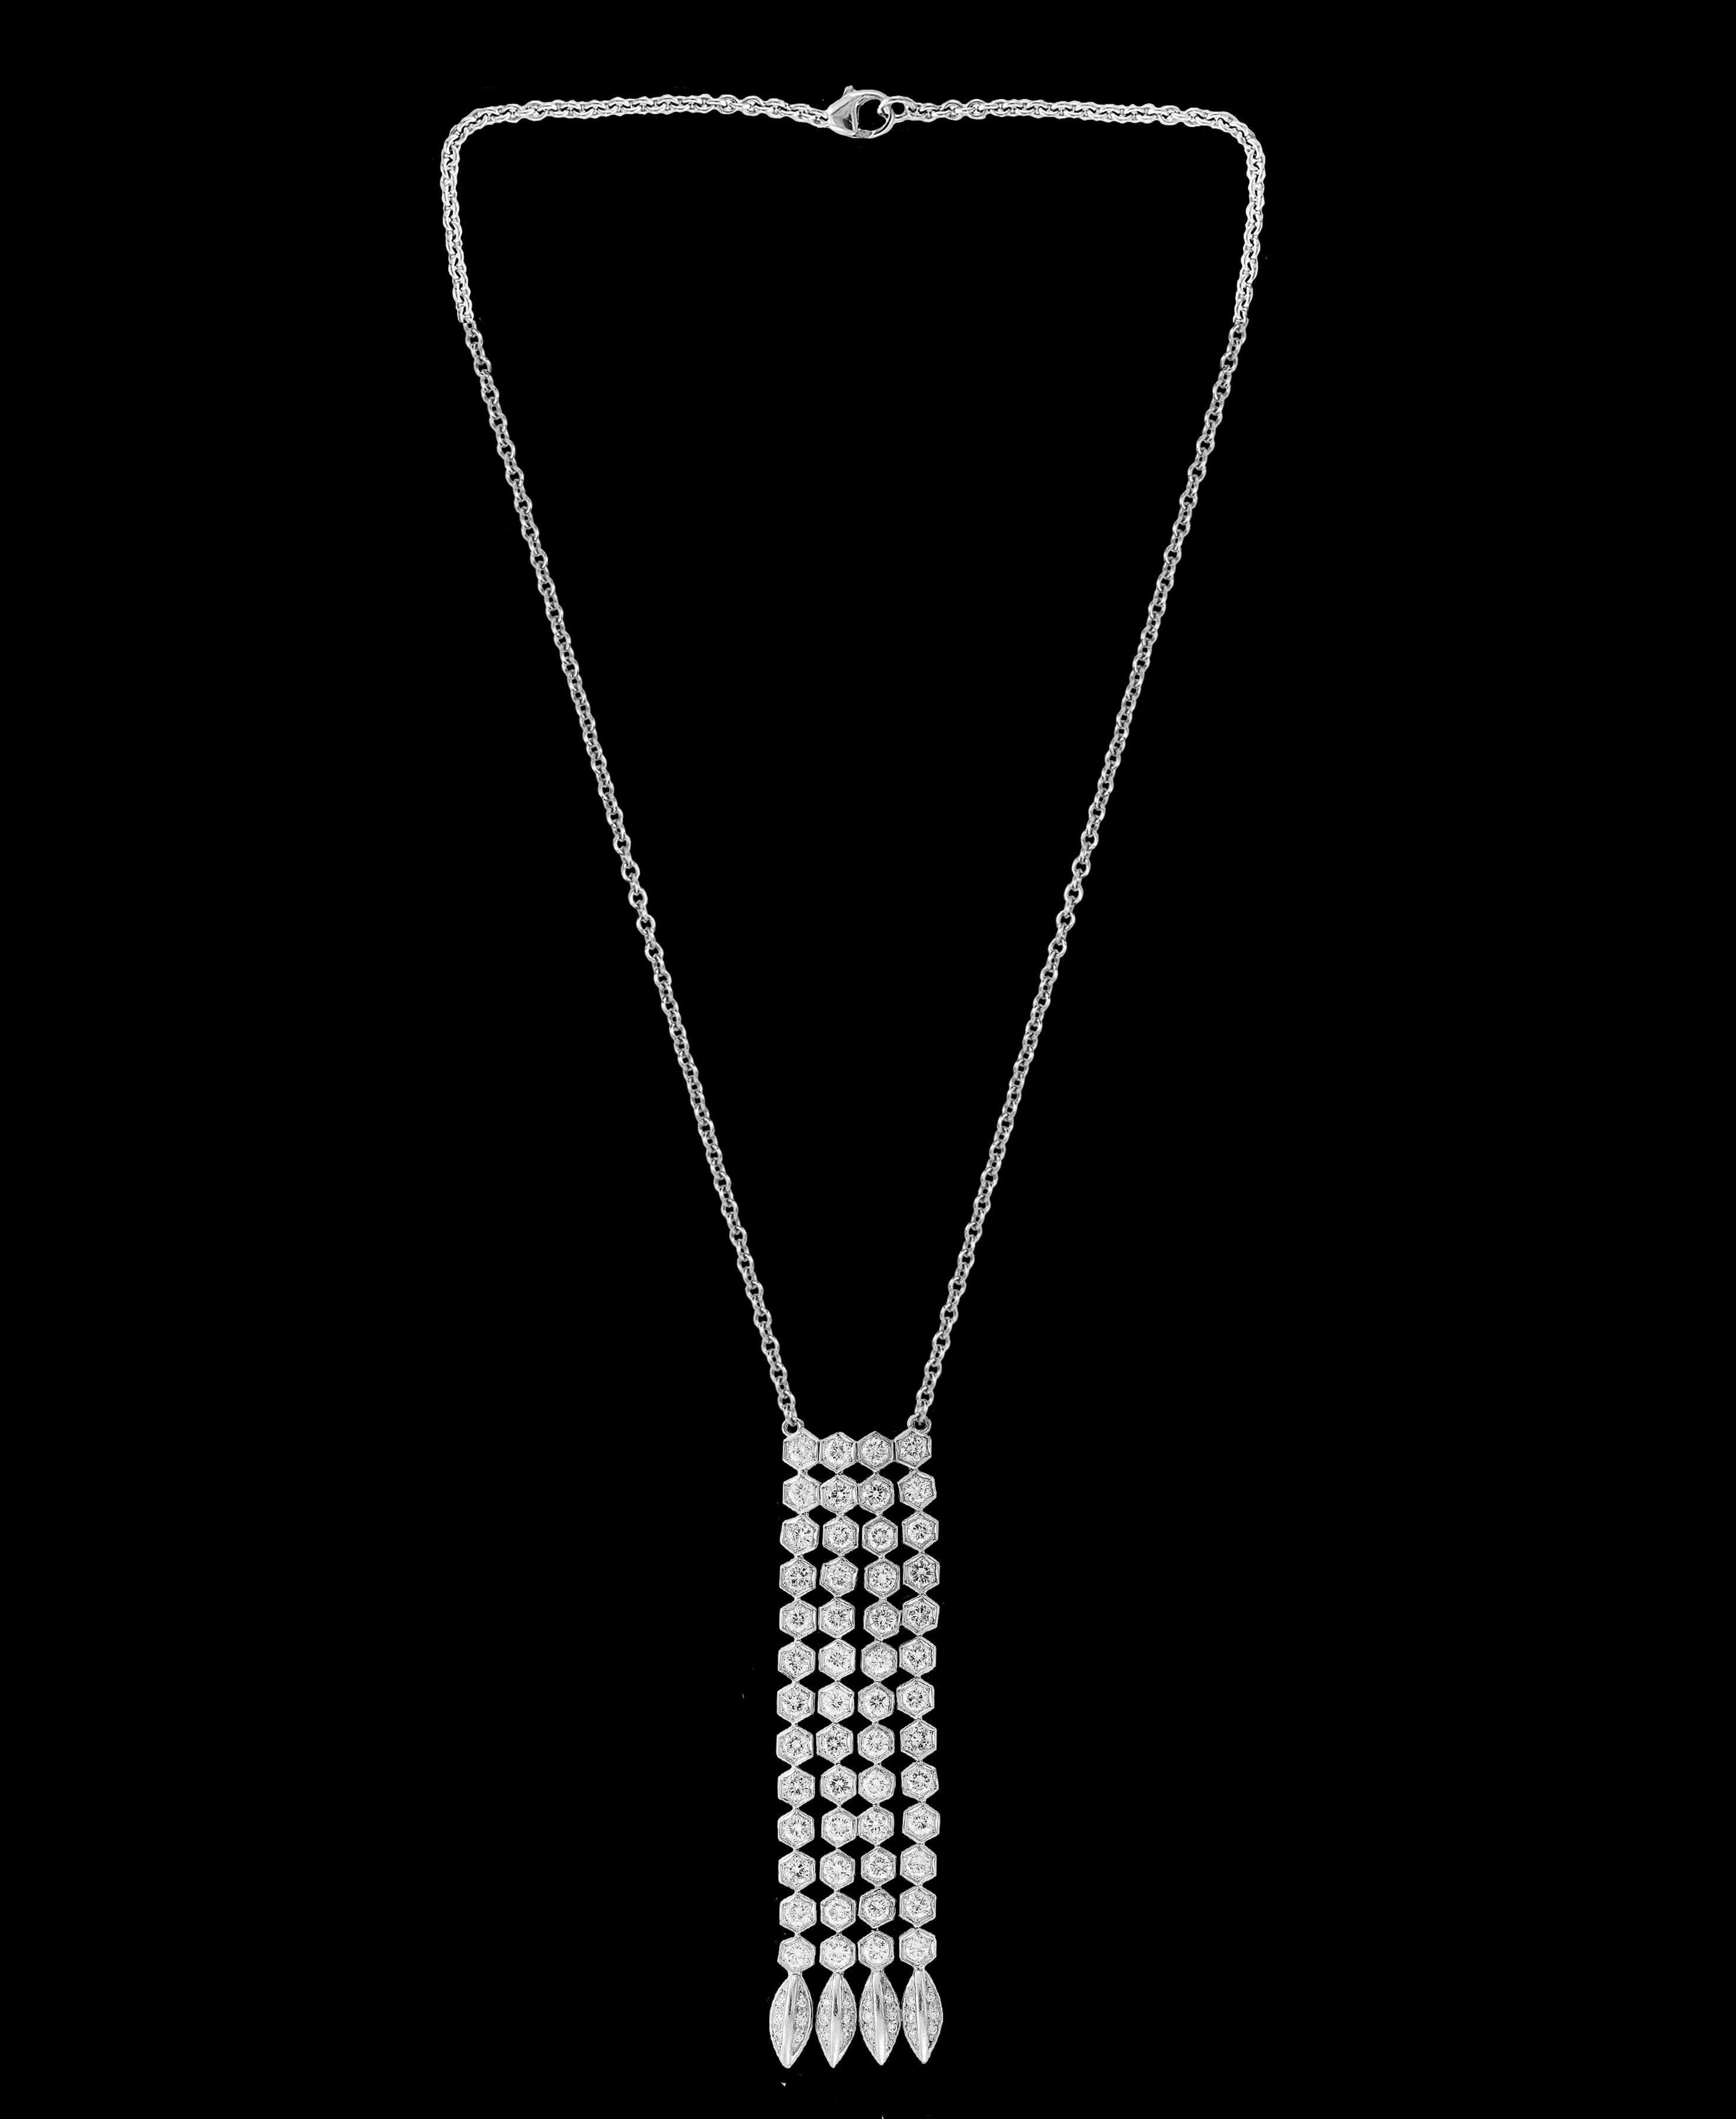 12 Carat Diamond Line Necklace and Line Earring Suite in 18 Karat White Gold 1